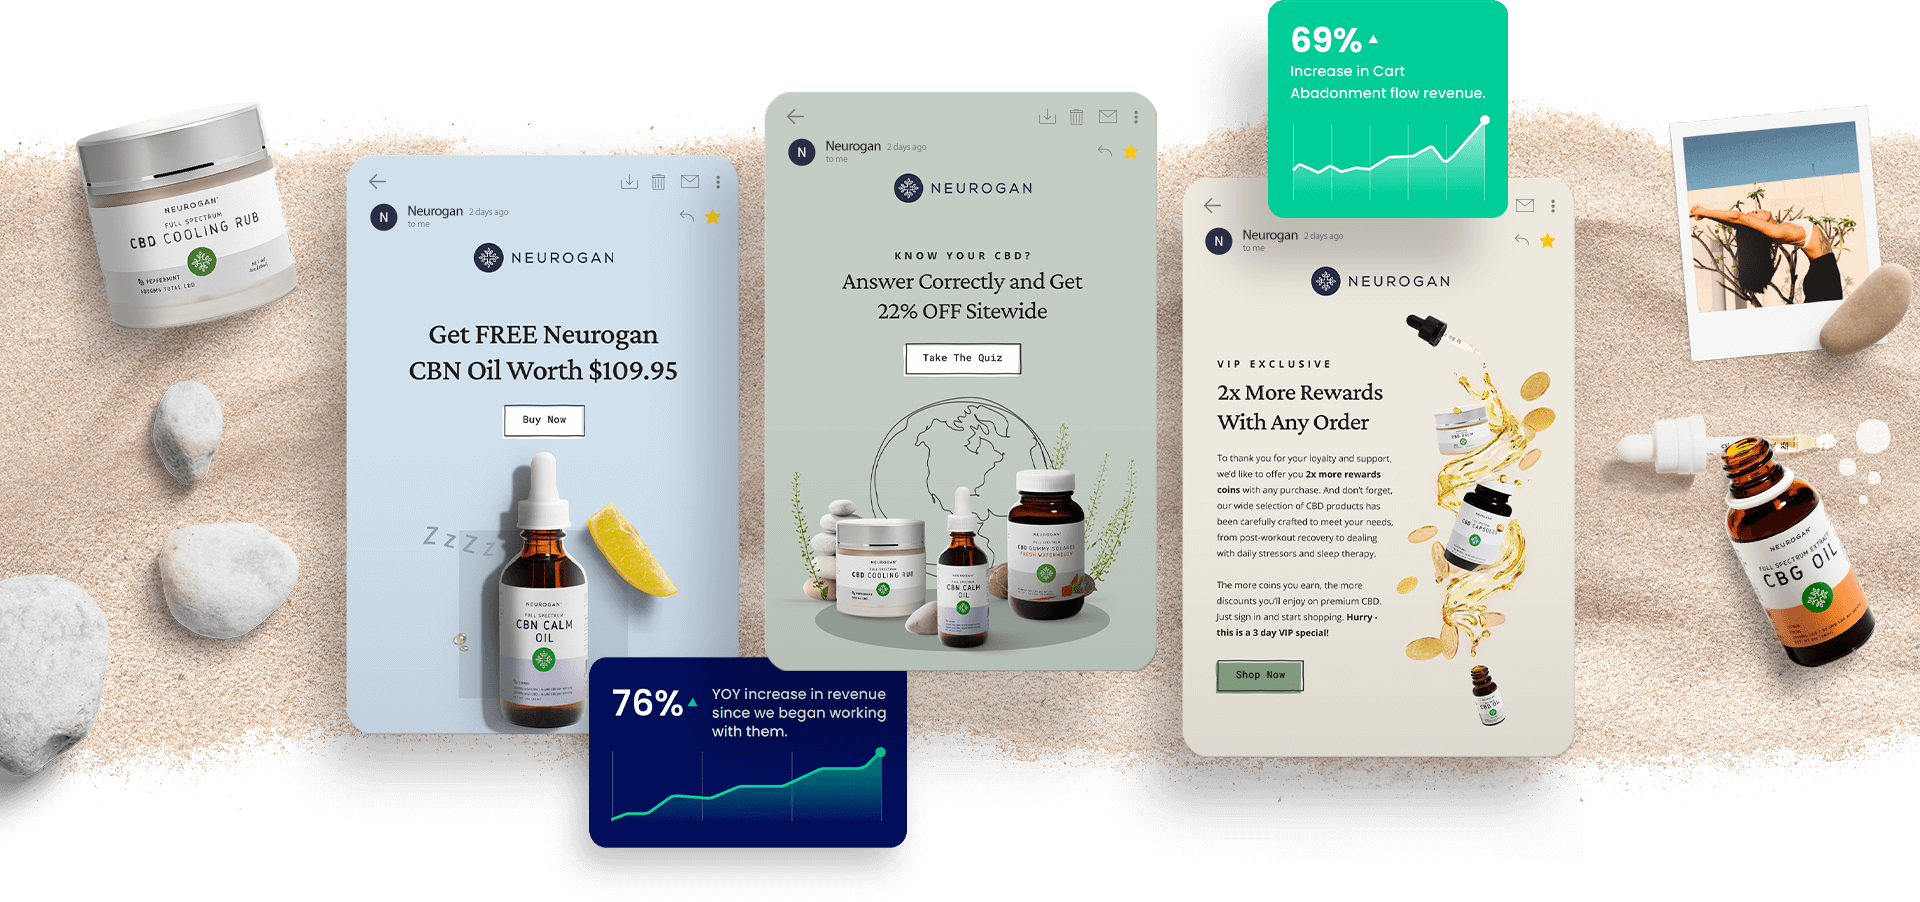 Examples of marketing newsletters by Neurogan